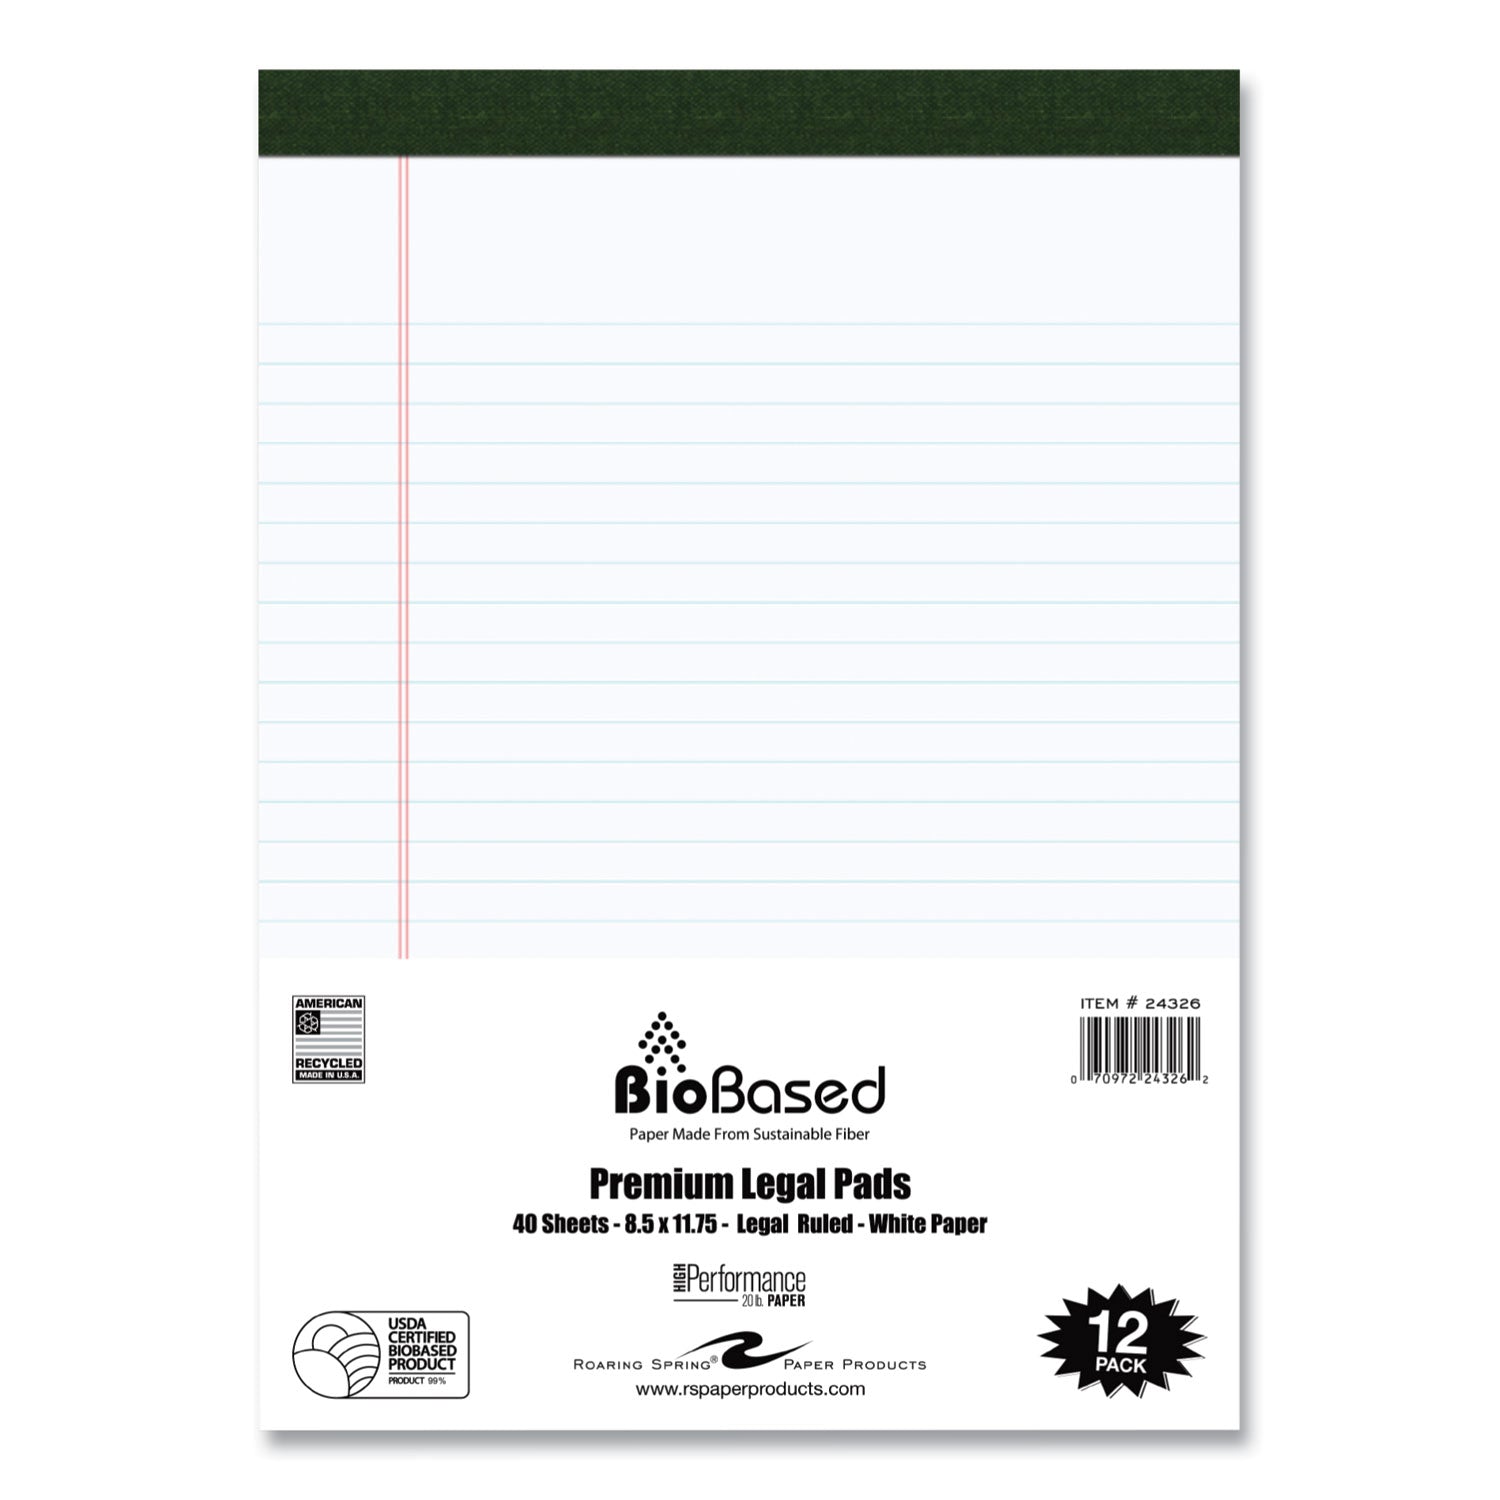 USDA Certified Bio-Preferred Legal Pad, Wide/Legal Rule, 40 White 8.5 x 11.75 Sheets, 12/Pack - 